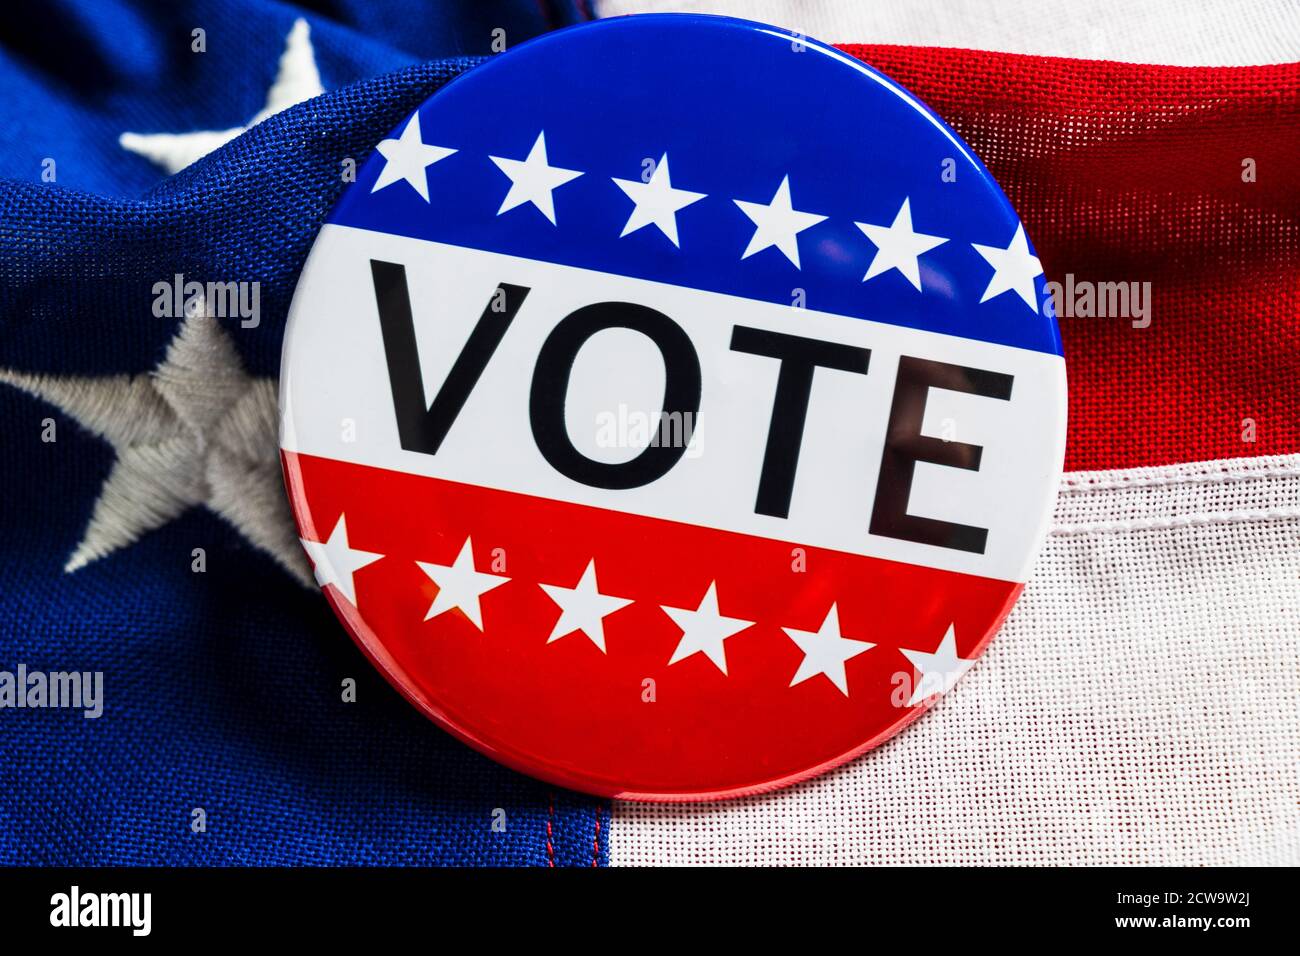 A red, white and blue VOTE button on an American flag Stock Photo